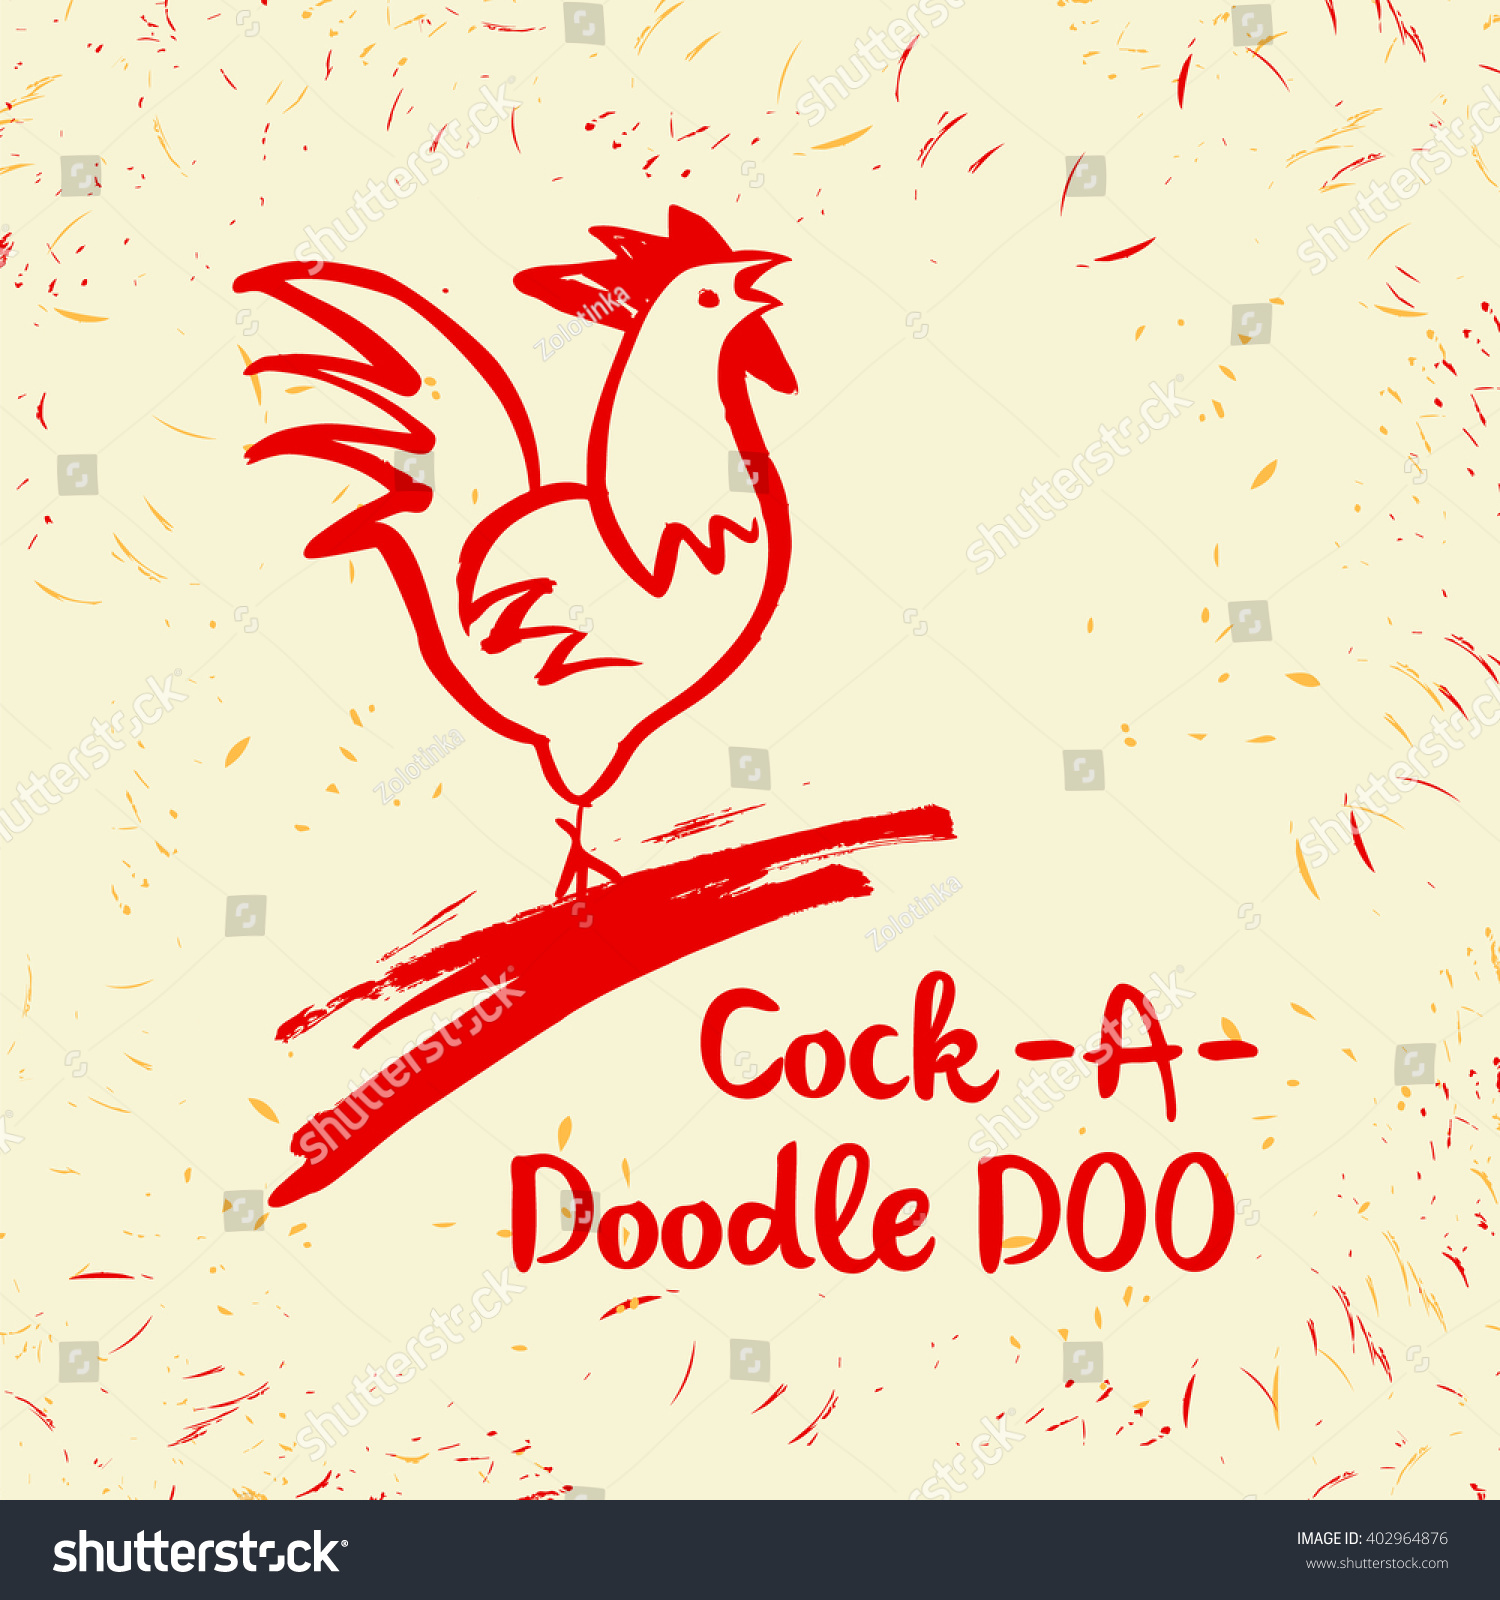 SVG of Vector logo. Hand drawn  illustration rooster on white and red background. Cock a doodle doo. Painted brush red cock. svg